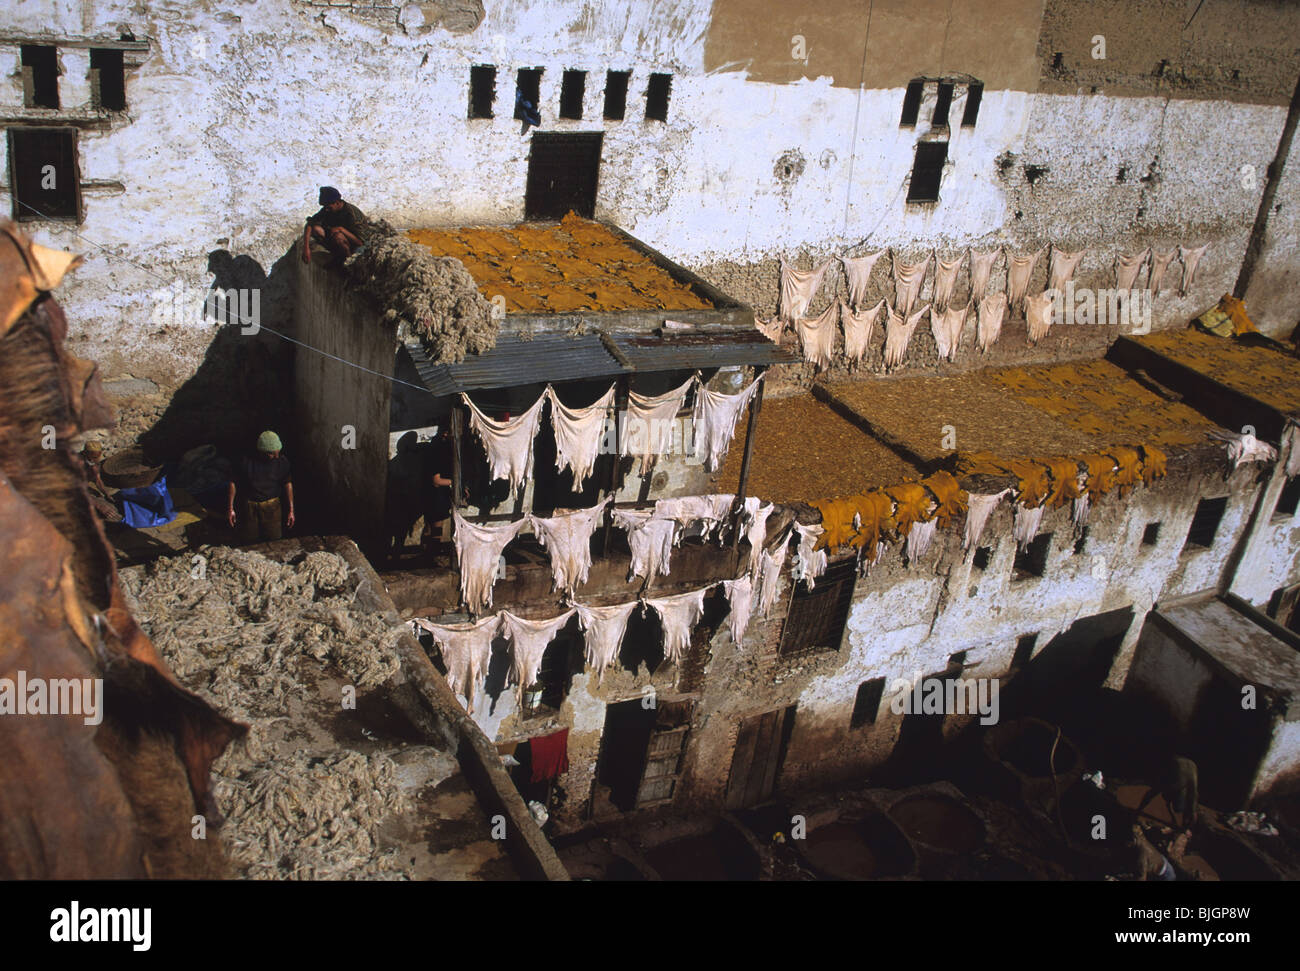 Animal skins attached to clothes line on a on roof top, drying in the sun, Morocco. Stock Photo